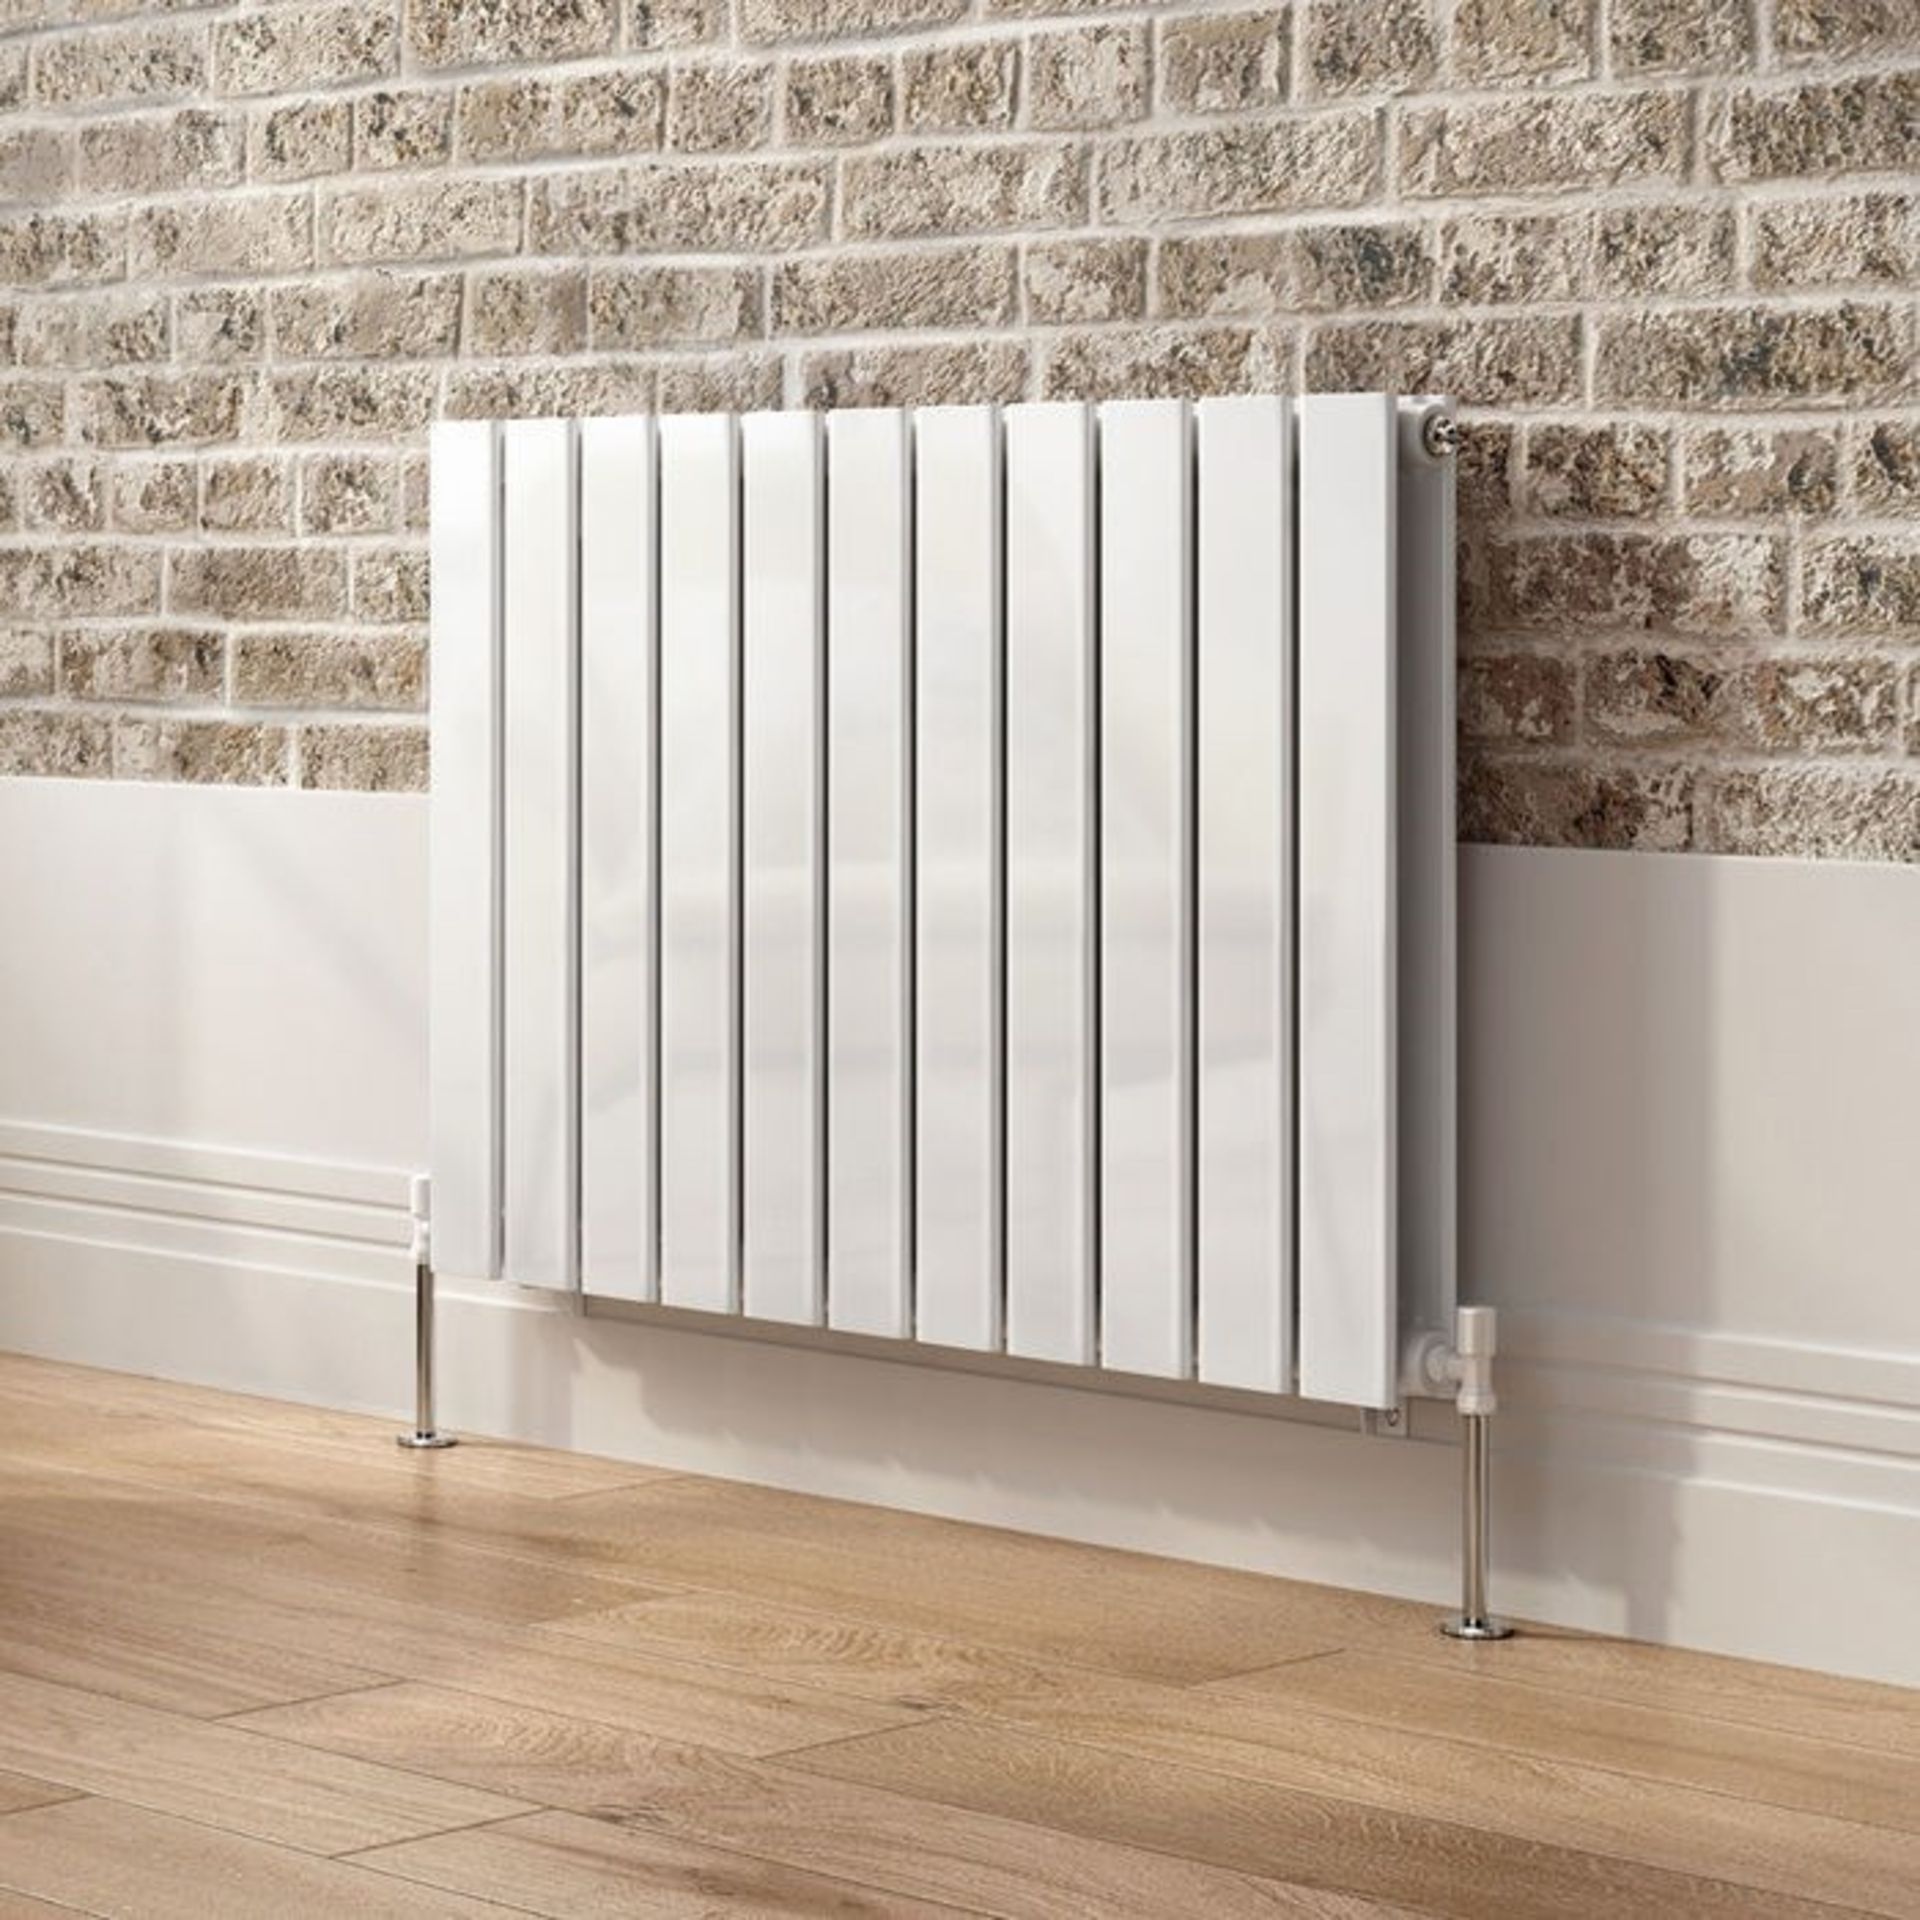 NEW & BOXED 600x830mm Gloss White Double Flat Panel Horizontal Radiator. RRP £474.99.RC2... - Image 2 of 2